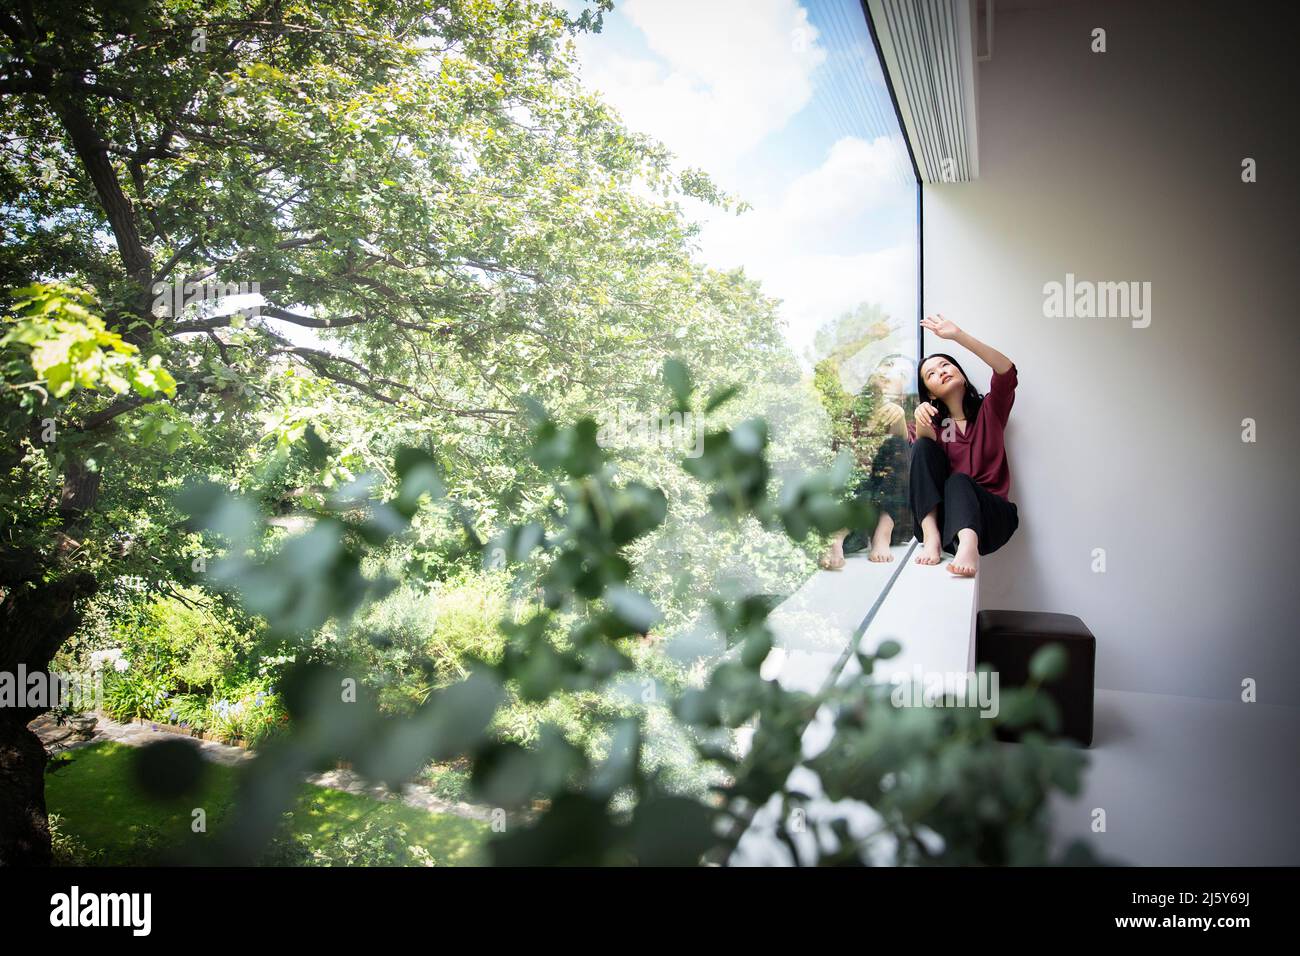 Young woman sitting in window with view of green trees Stock Photo